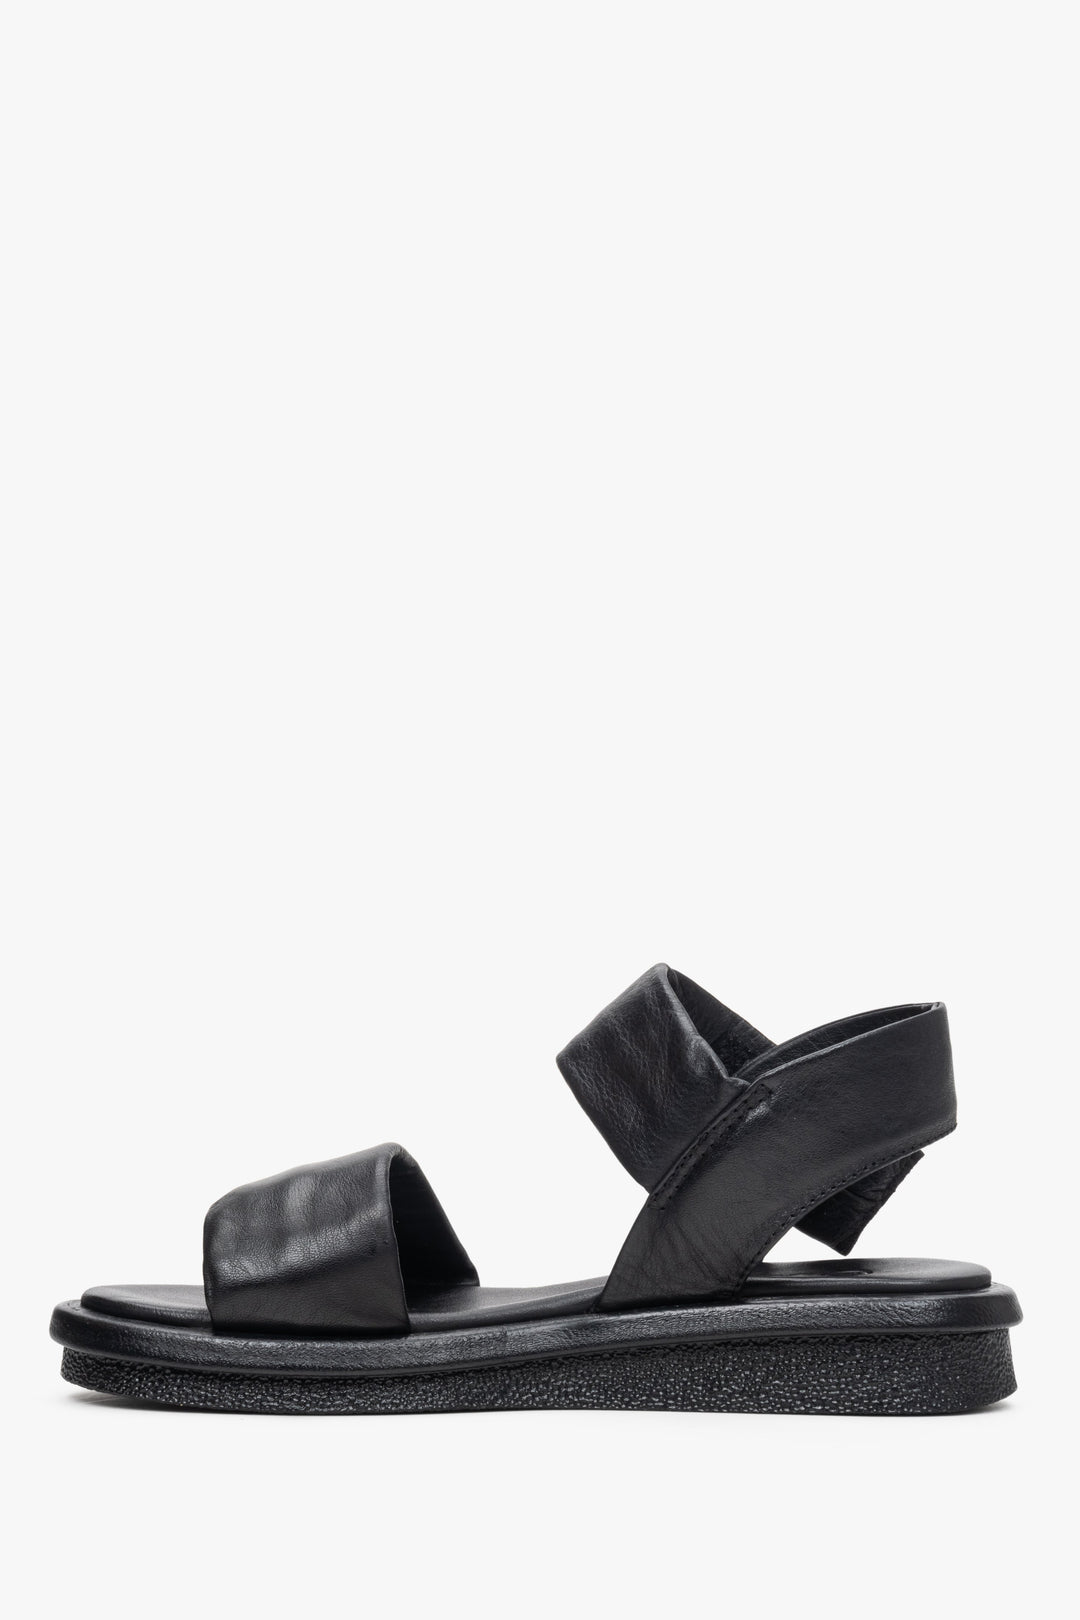 Estro black leather women's sandals with a low heel.